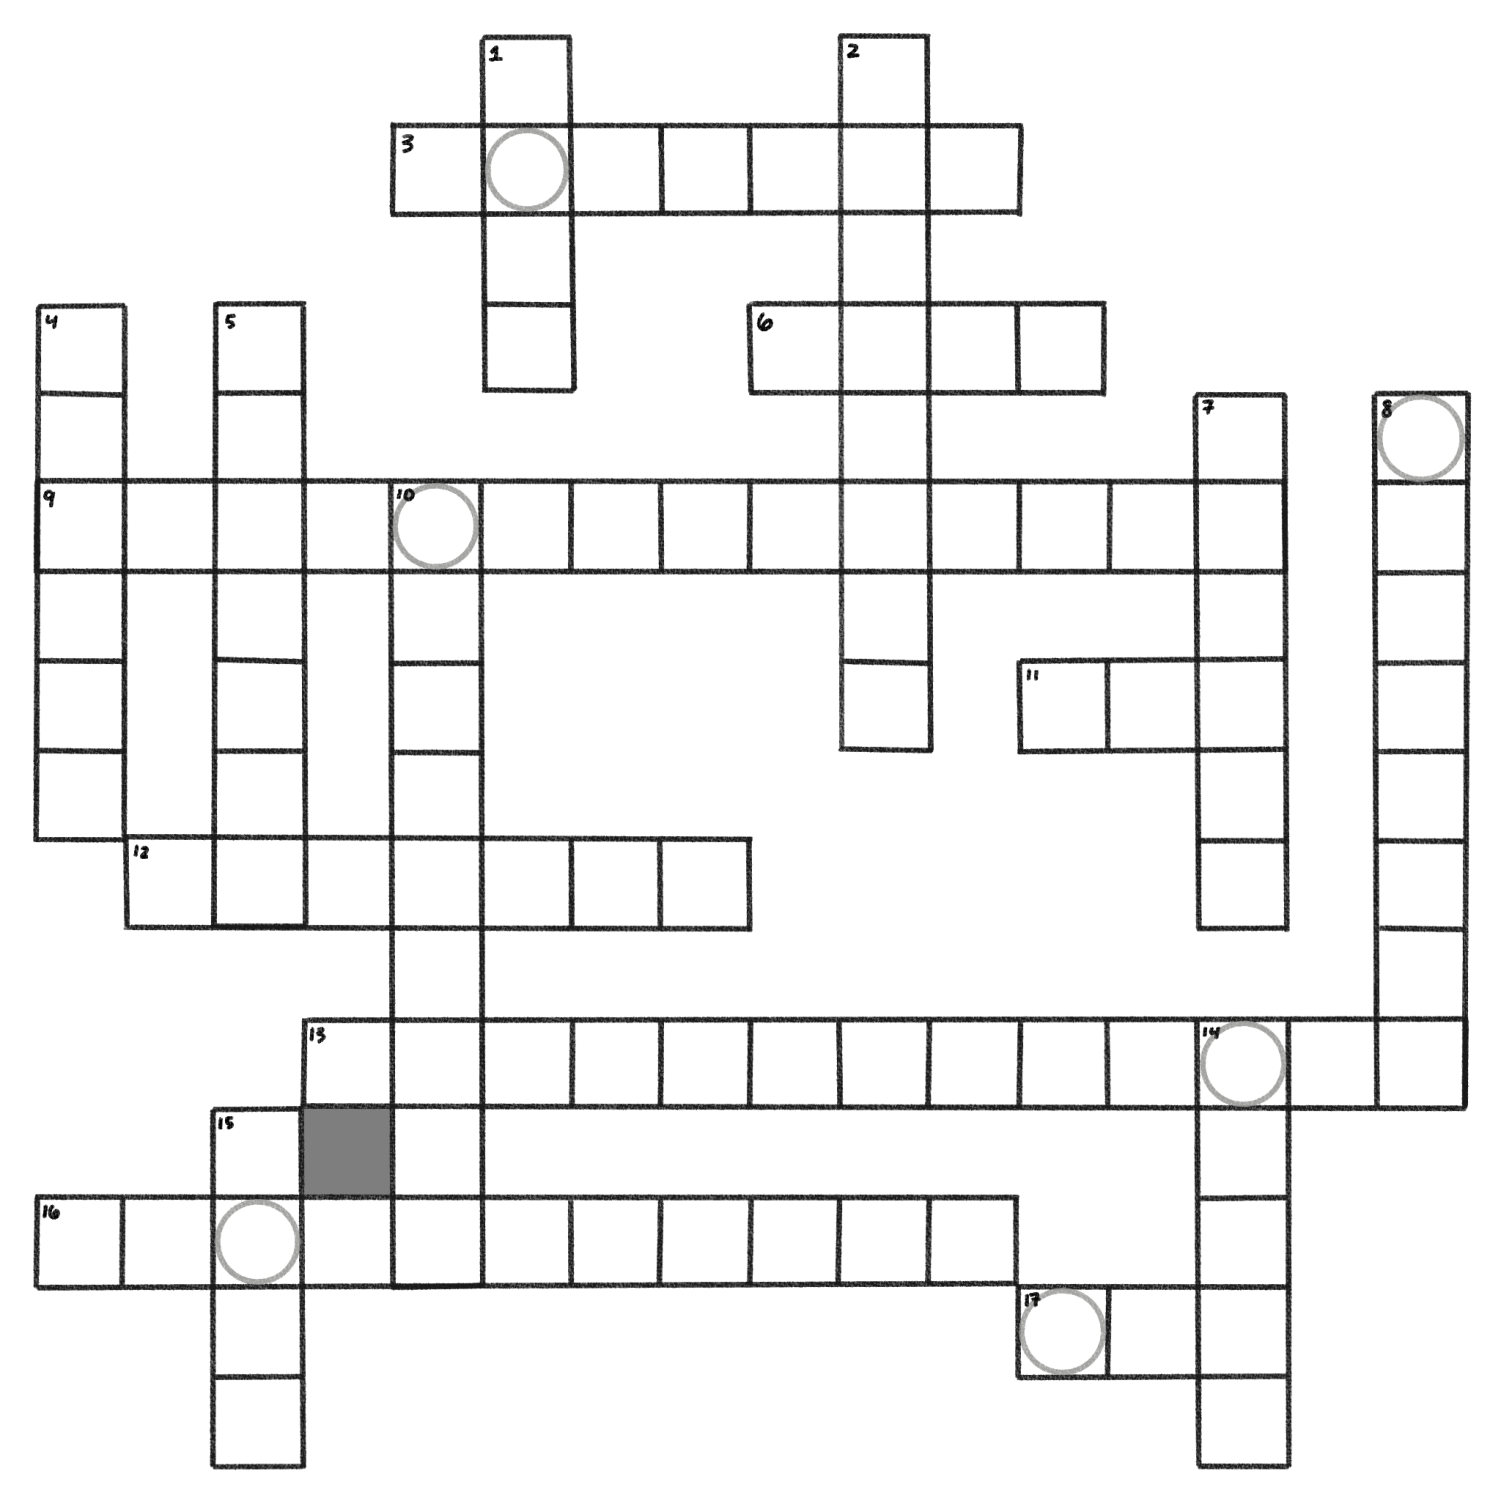 Gunn names to know (interactive crossword) The Oracle